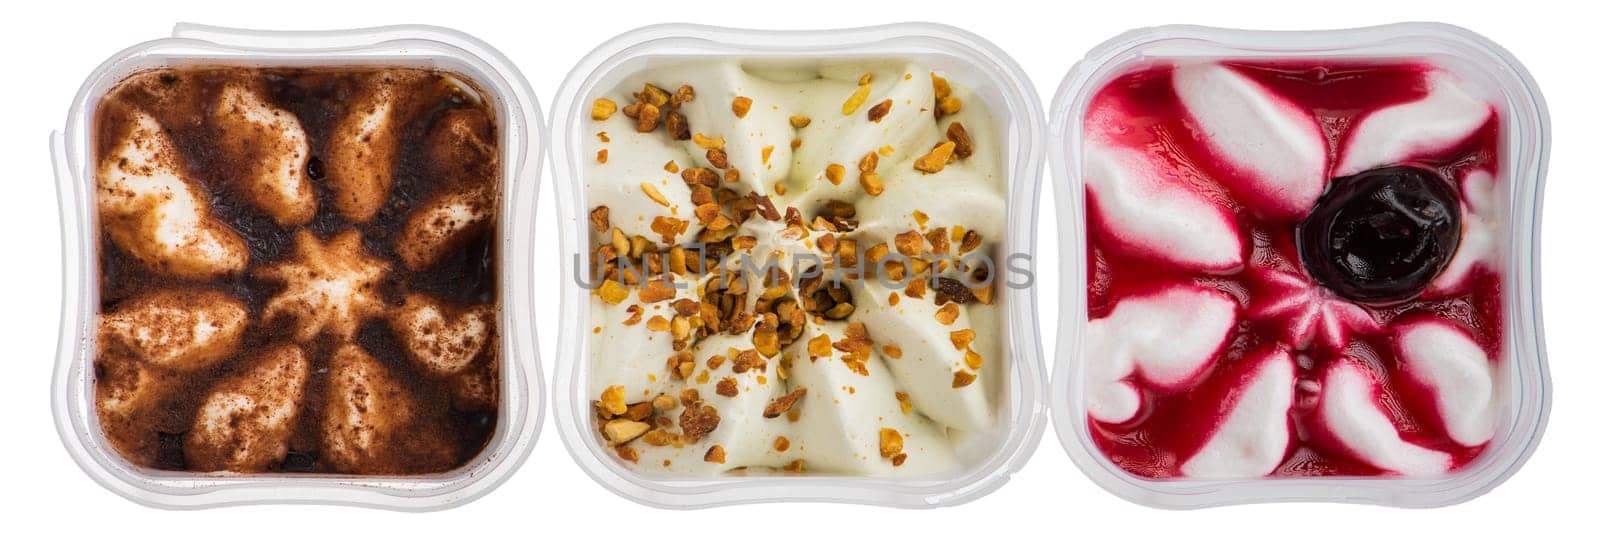 Set of ice cream of different varieties. Cherry ice cream, pistachio and cinnamon, in a cup isolated on a white background. The concept of a delicious and freezing treat for children and adults